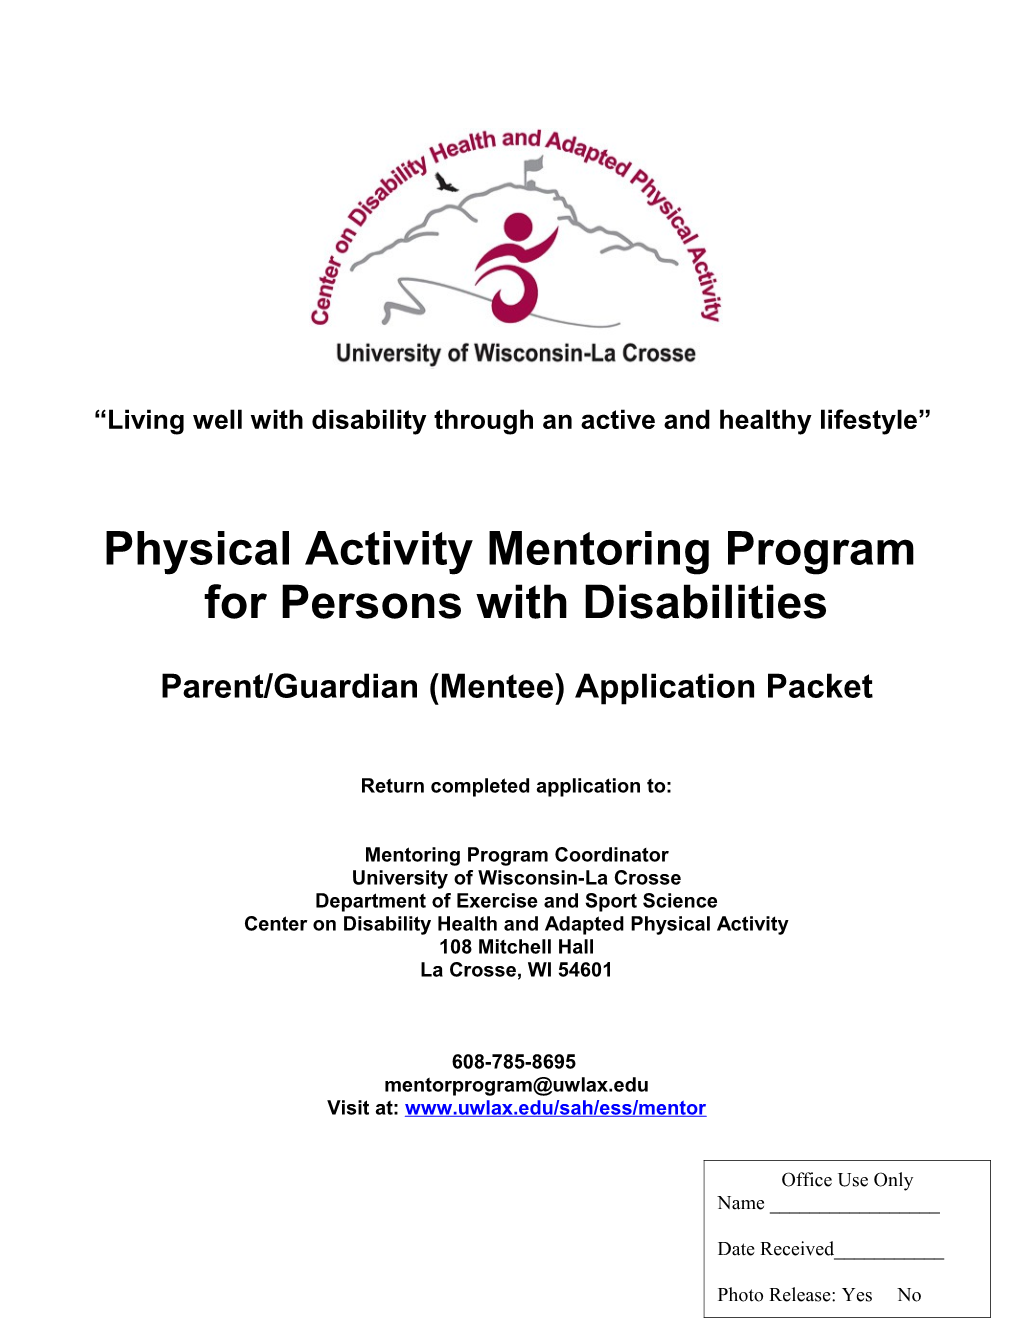 Physical Activity Mentoring Program for Children and Youth with Disabilities*